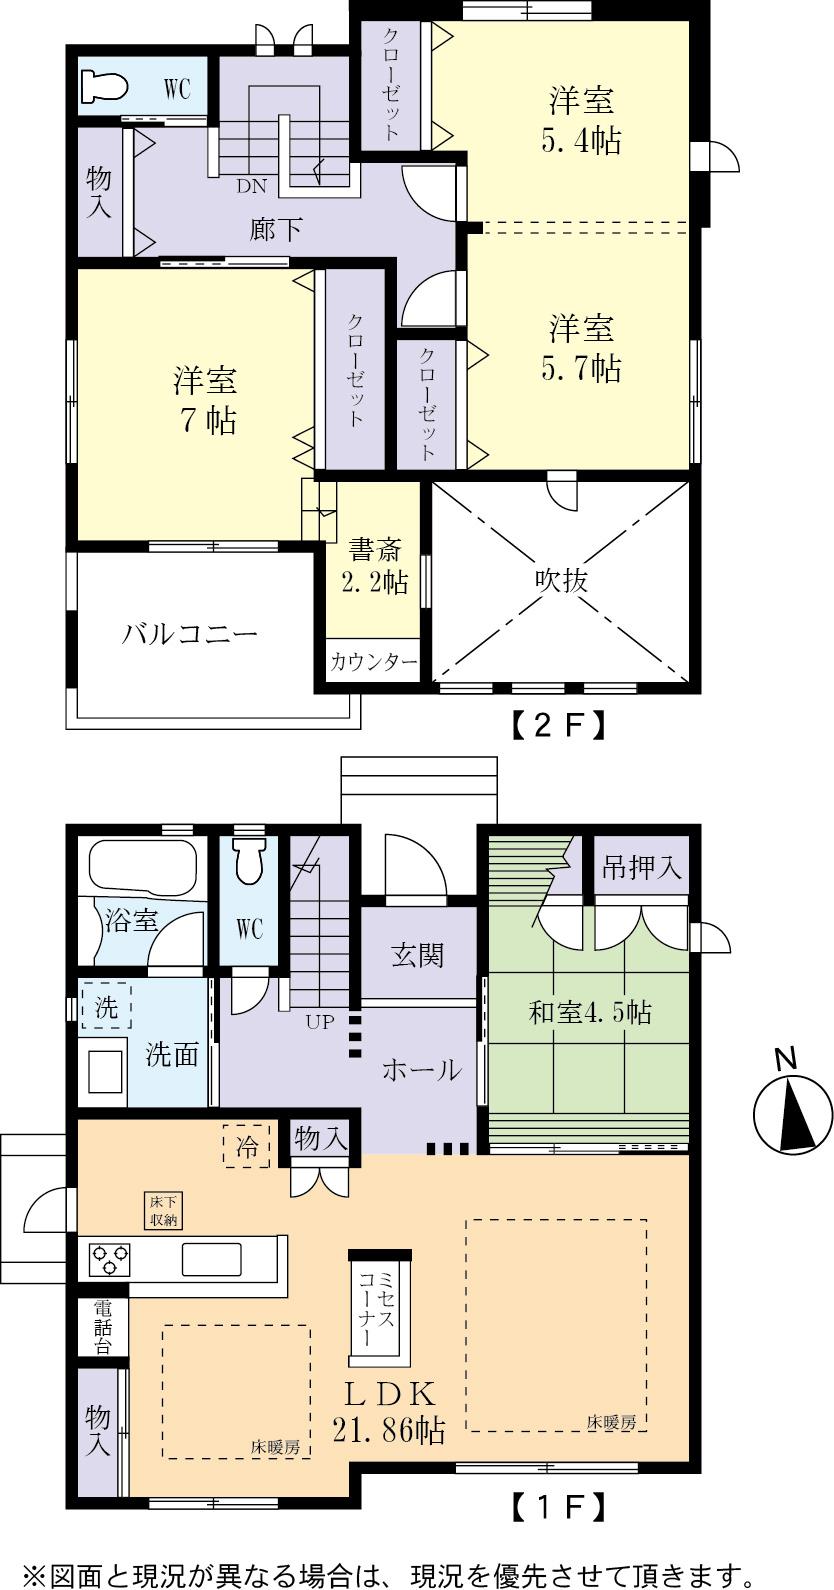 Floor plan. 47,800,000 yen, 3LDK + S (storeroom), Land area 181.94 sq m , With a building area of ​​117.94 sq m partition, Will 4LDK. 